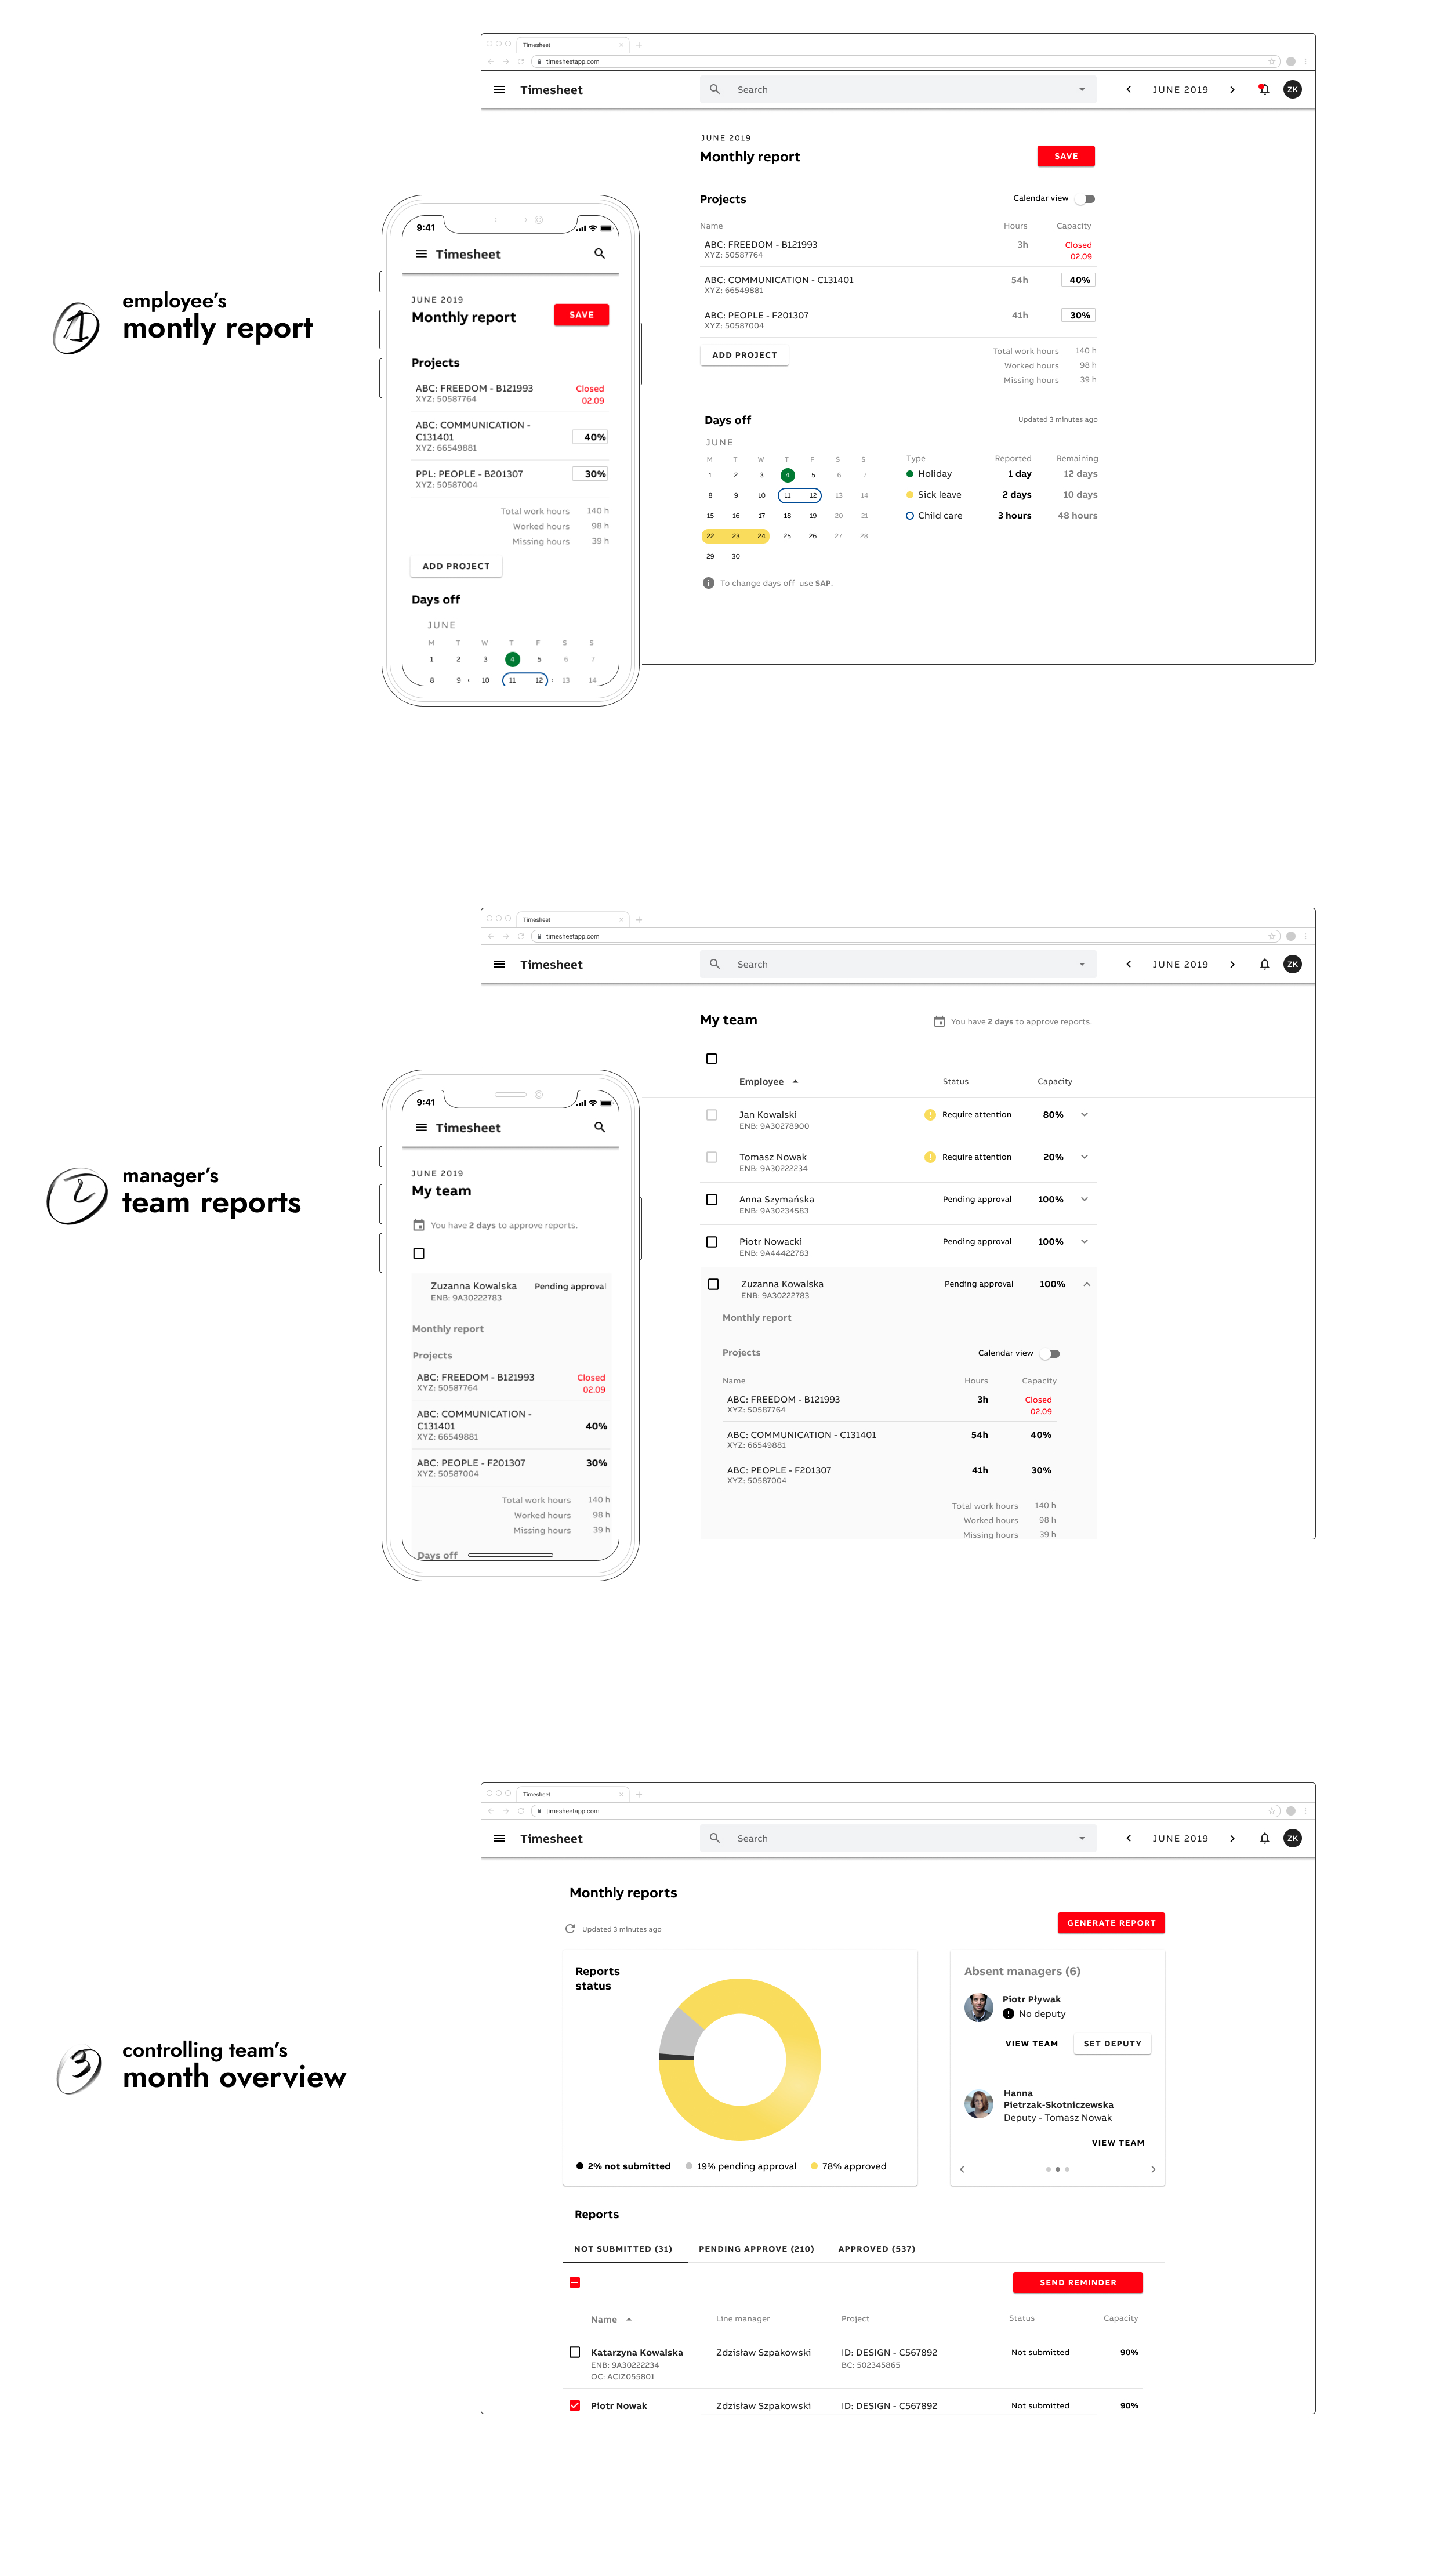 UI designs of the application.